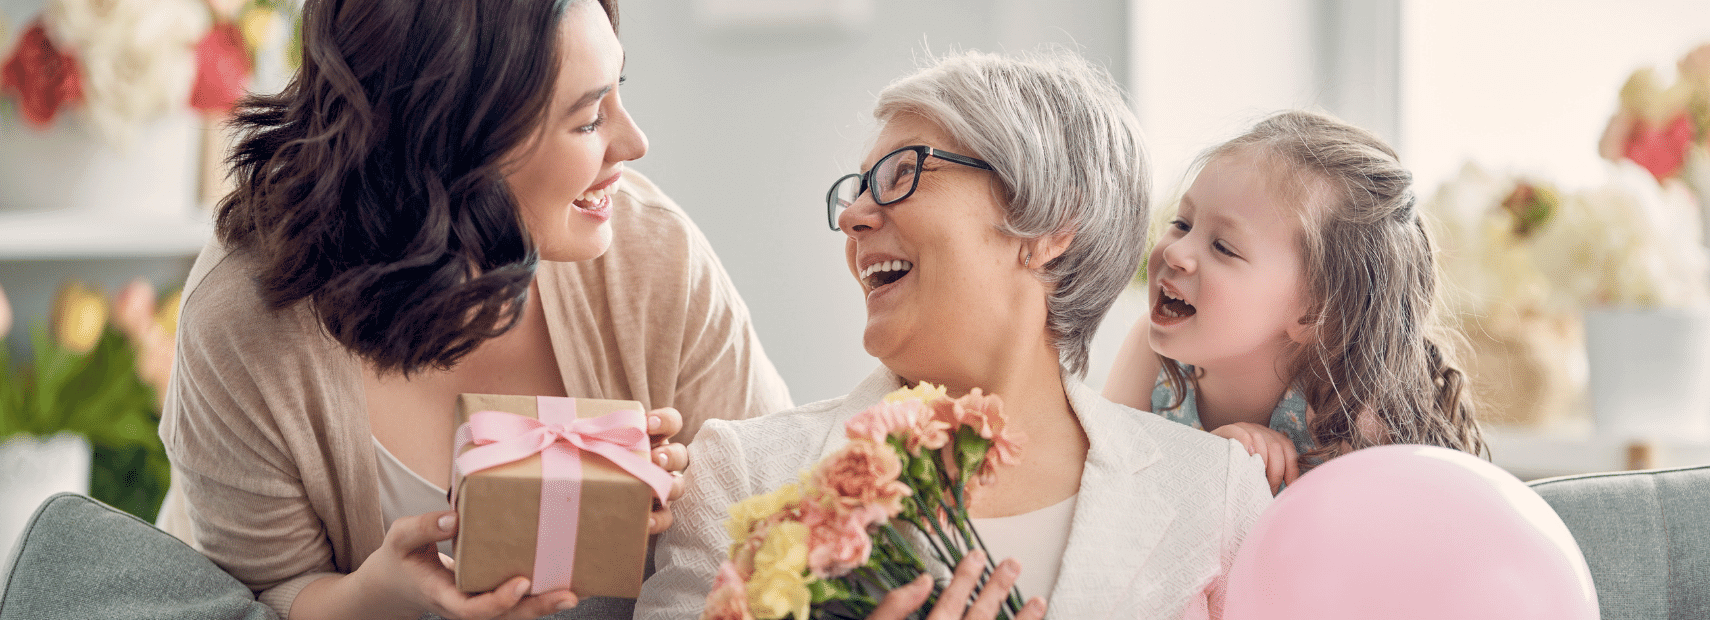 Mother’s Day Product & Marketing Ideas